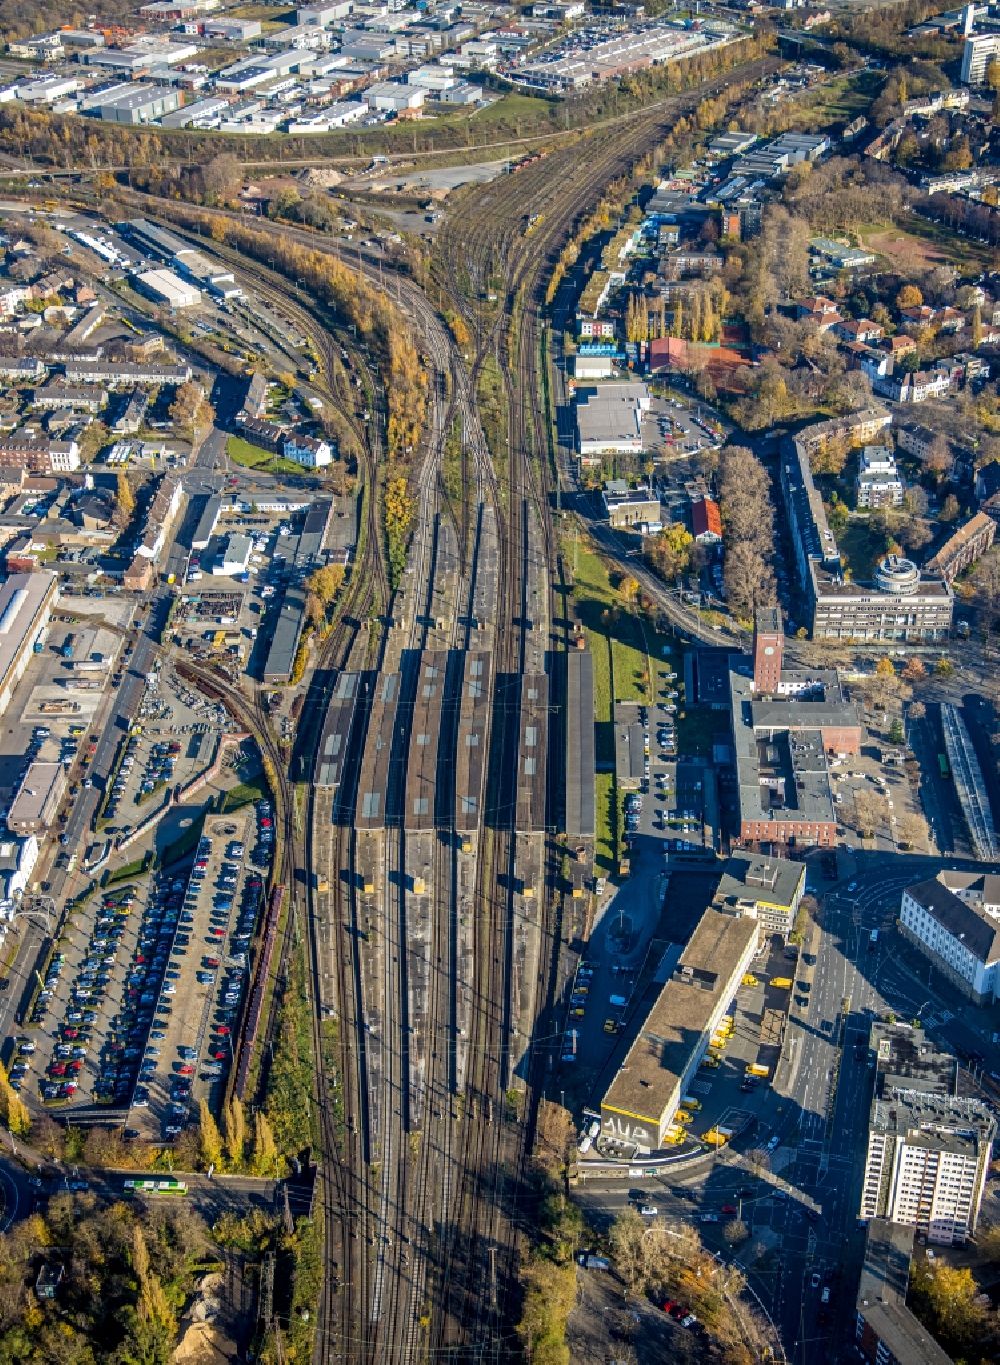 Oberhausen from above - Track progress and building of the main station of the railway in Oberhausen in the state North Rhine-Westphalia